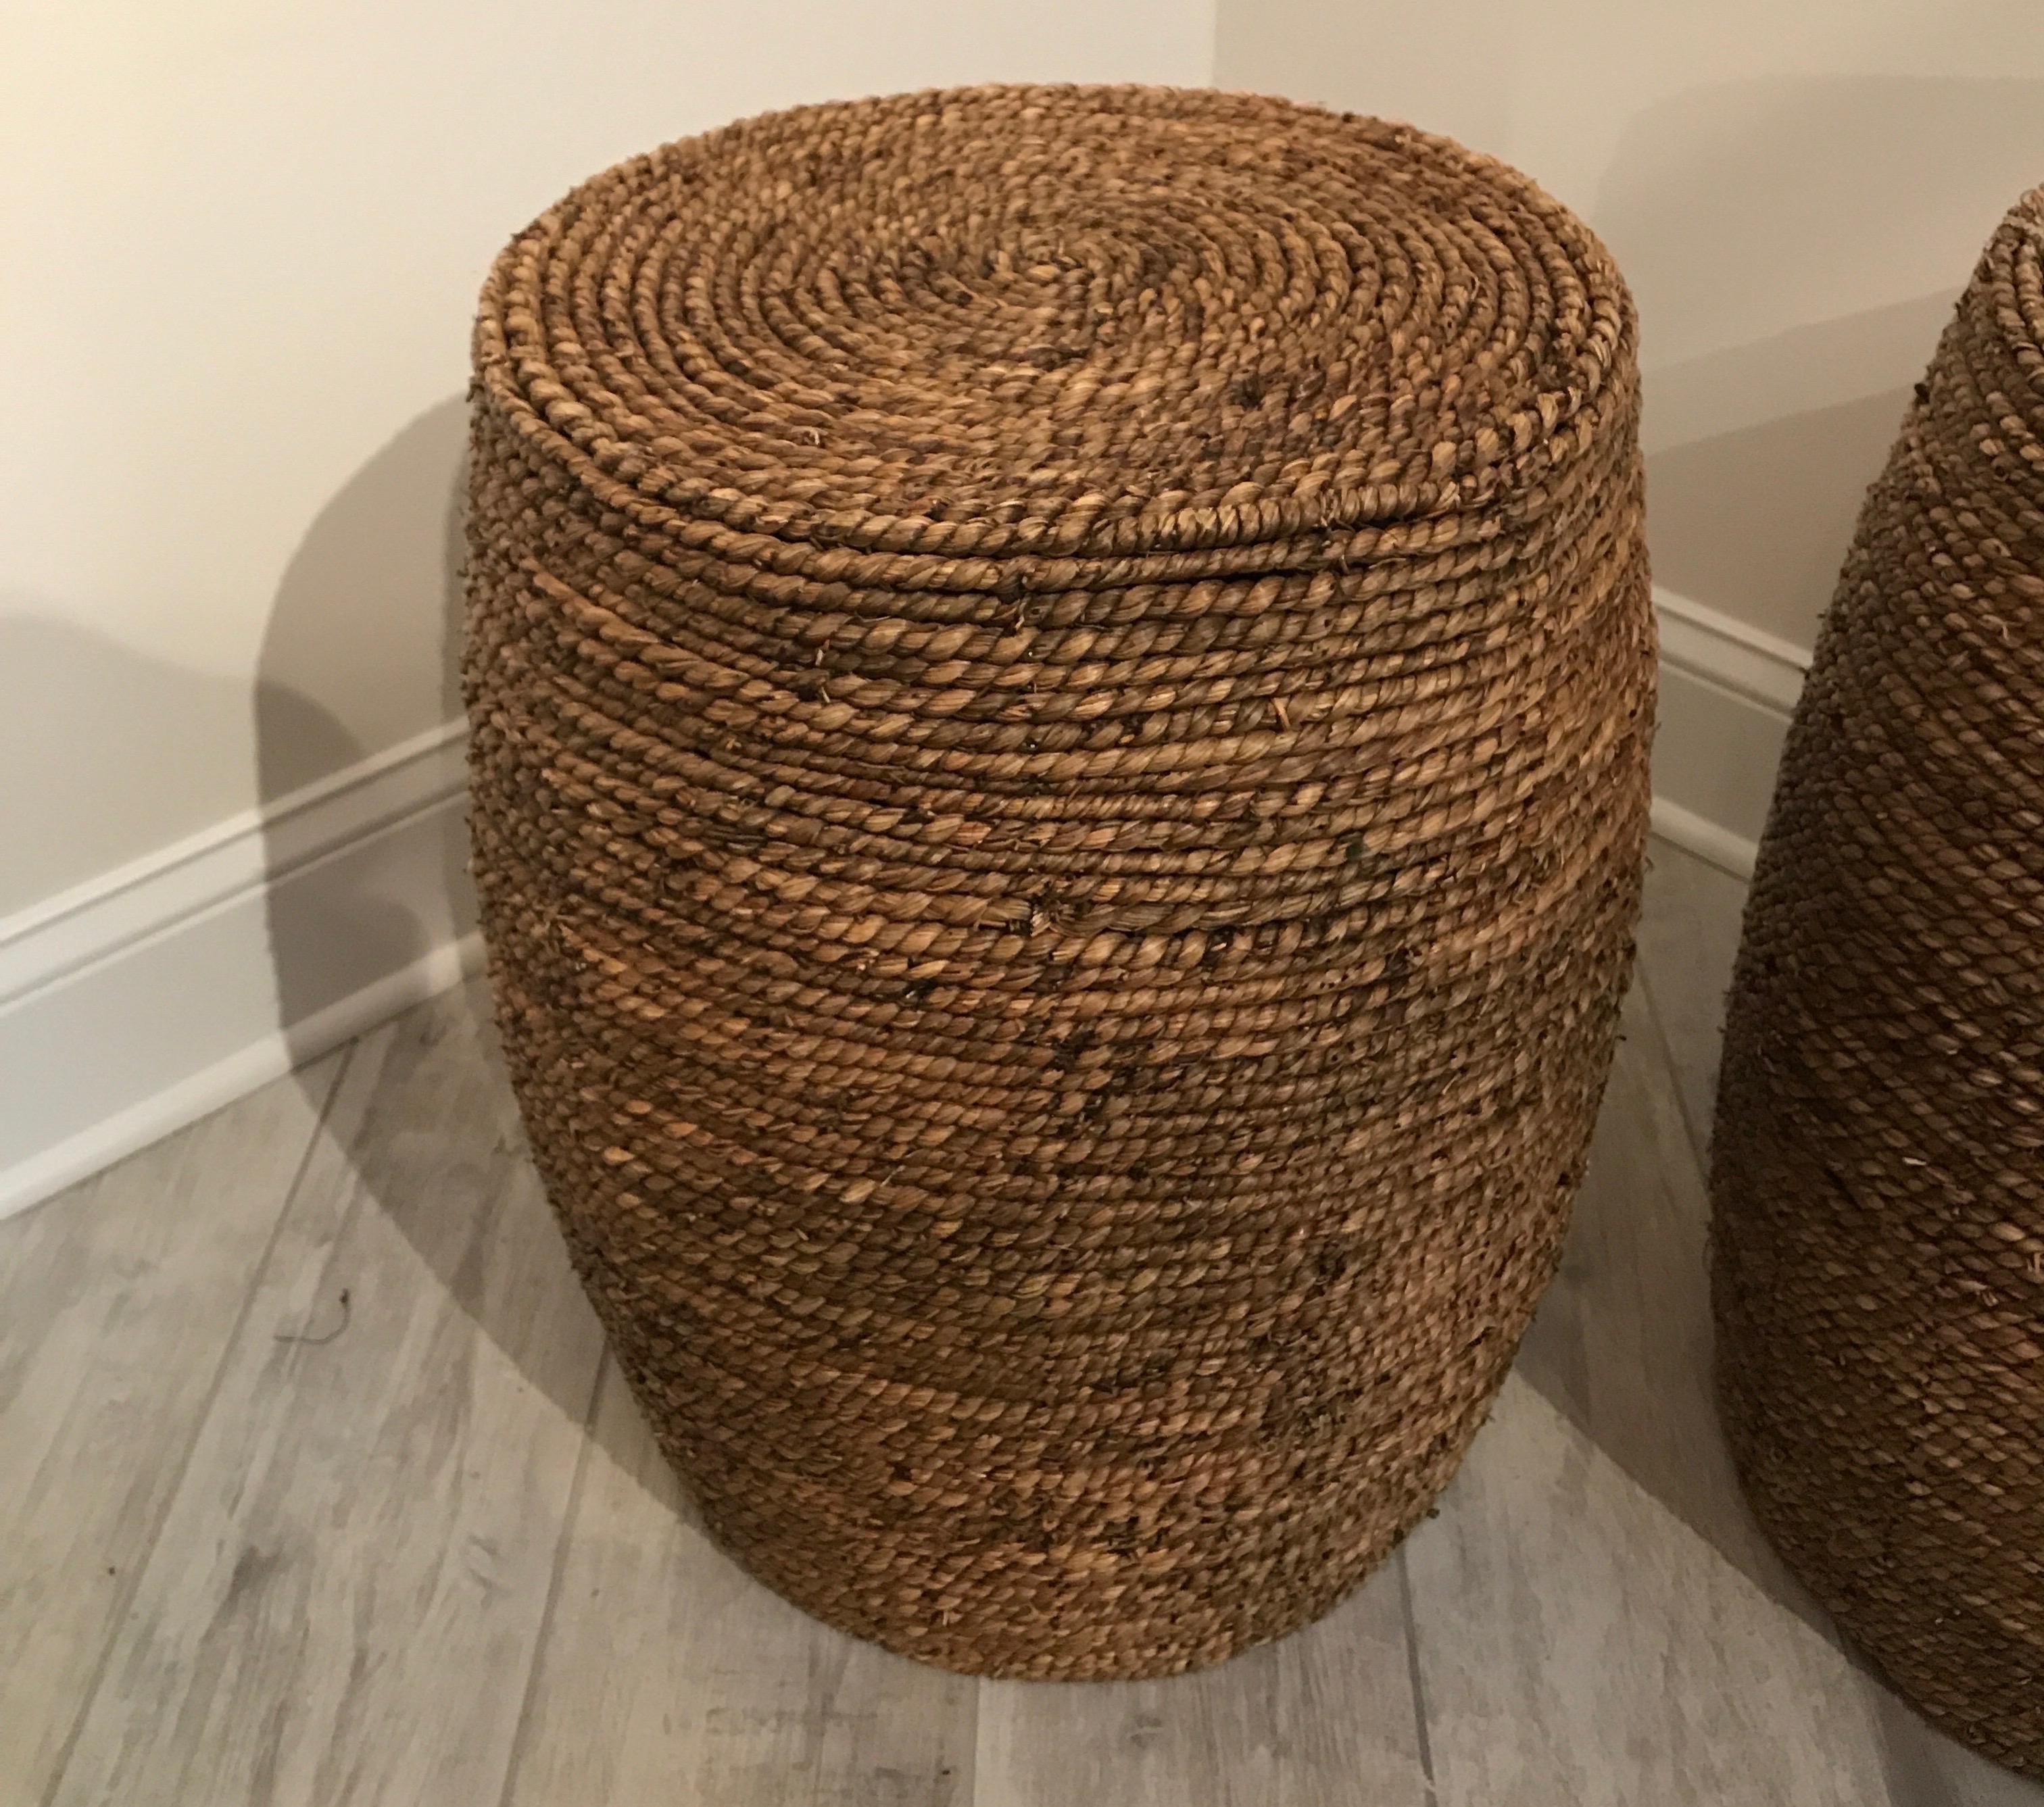 Pair of natural jute wrapped wood garden seats / side tables.